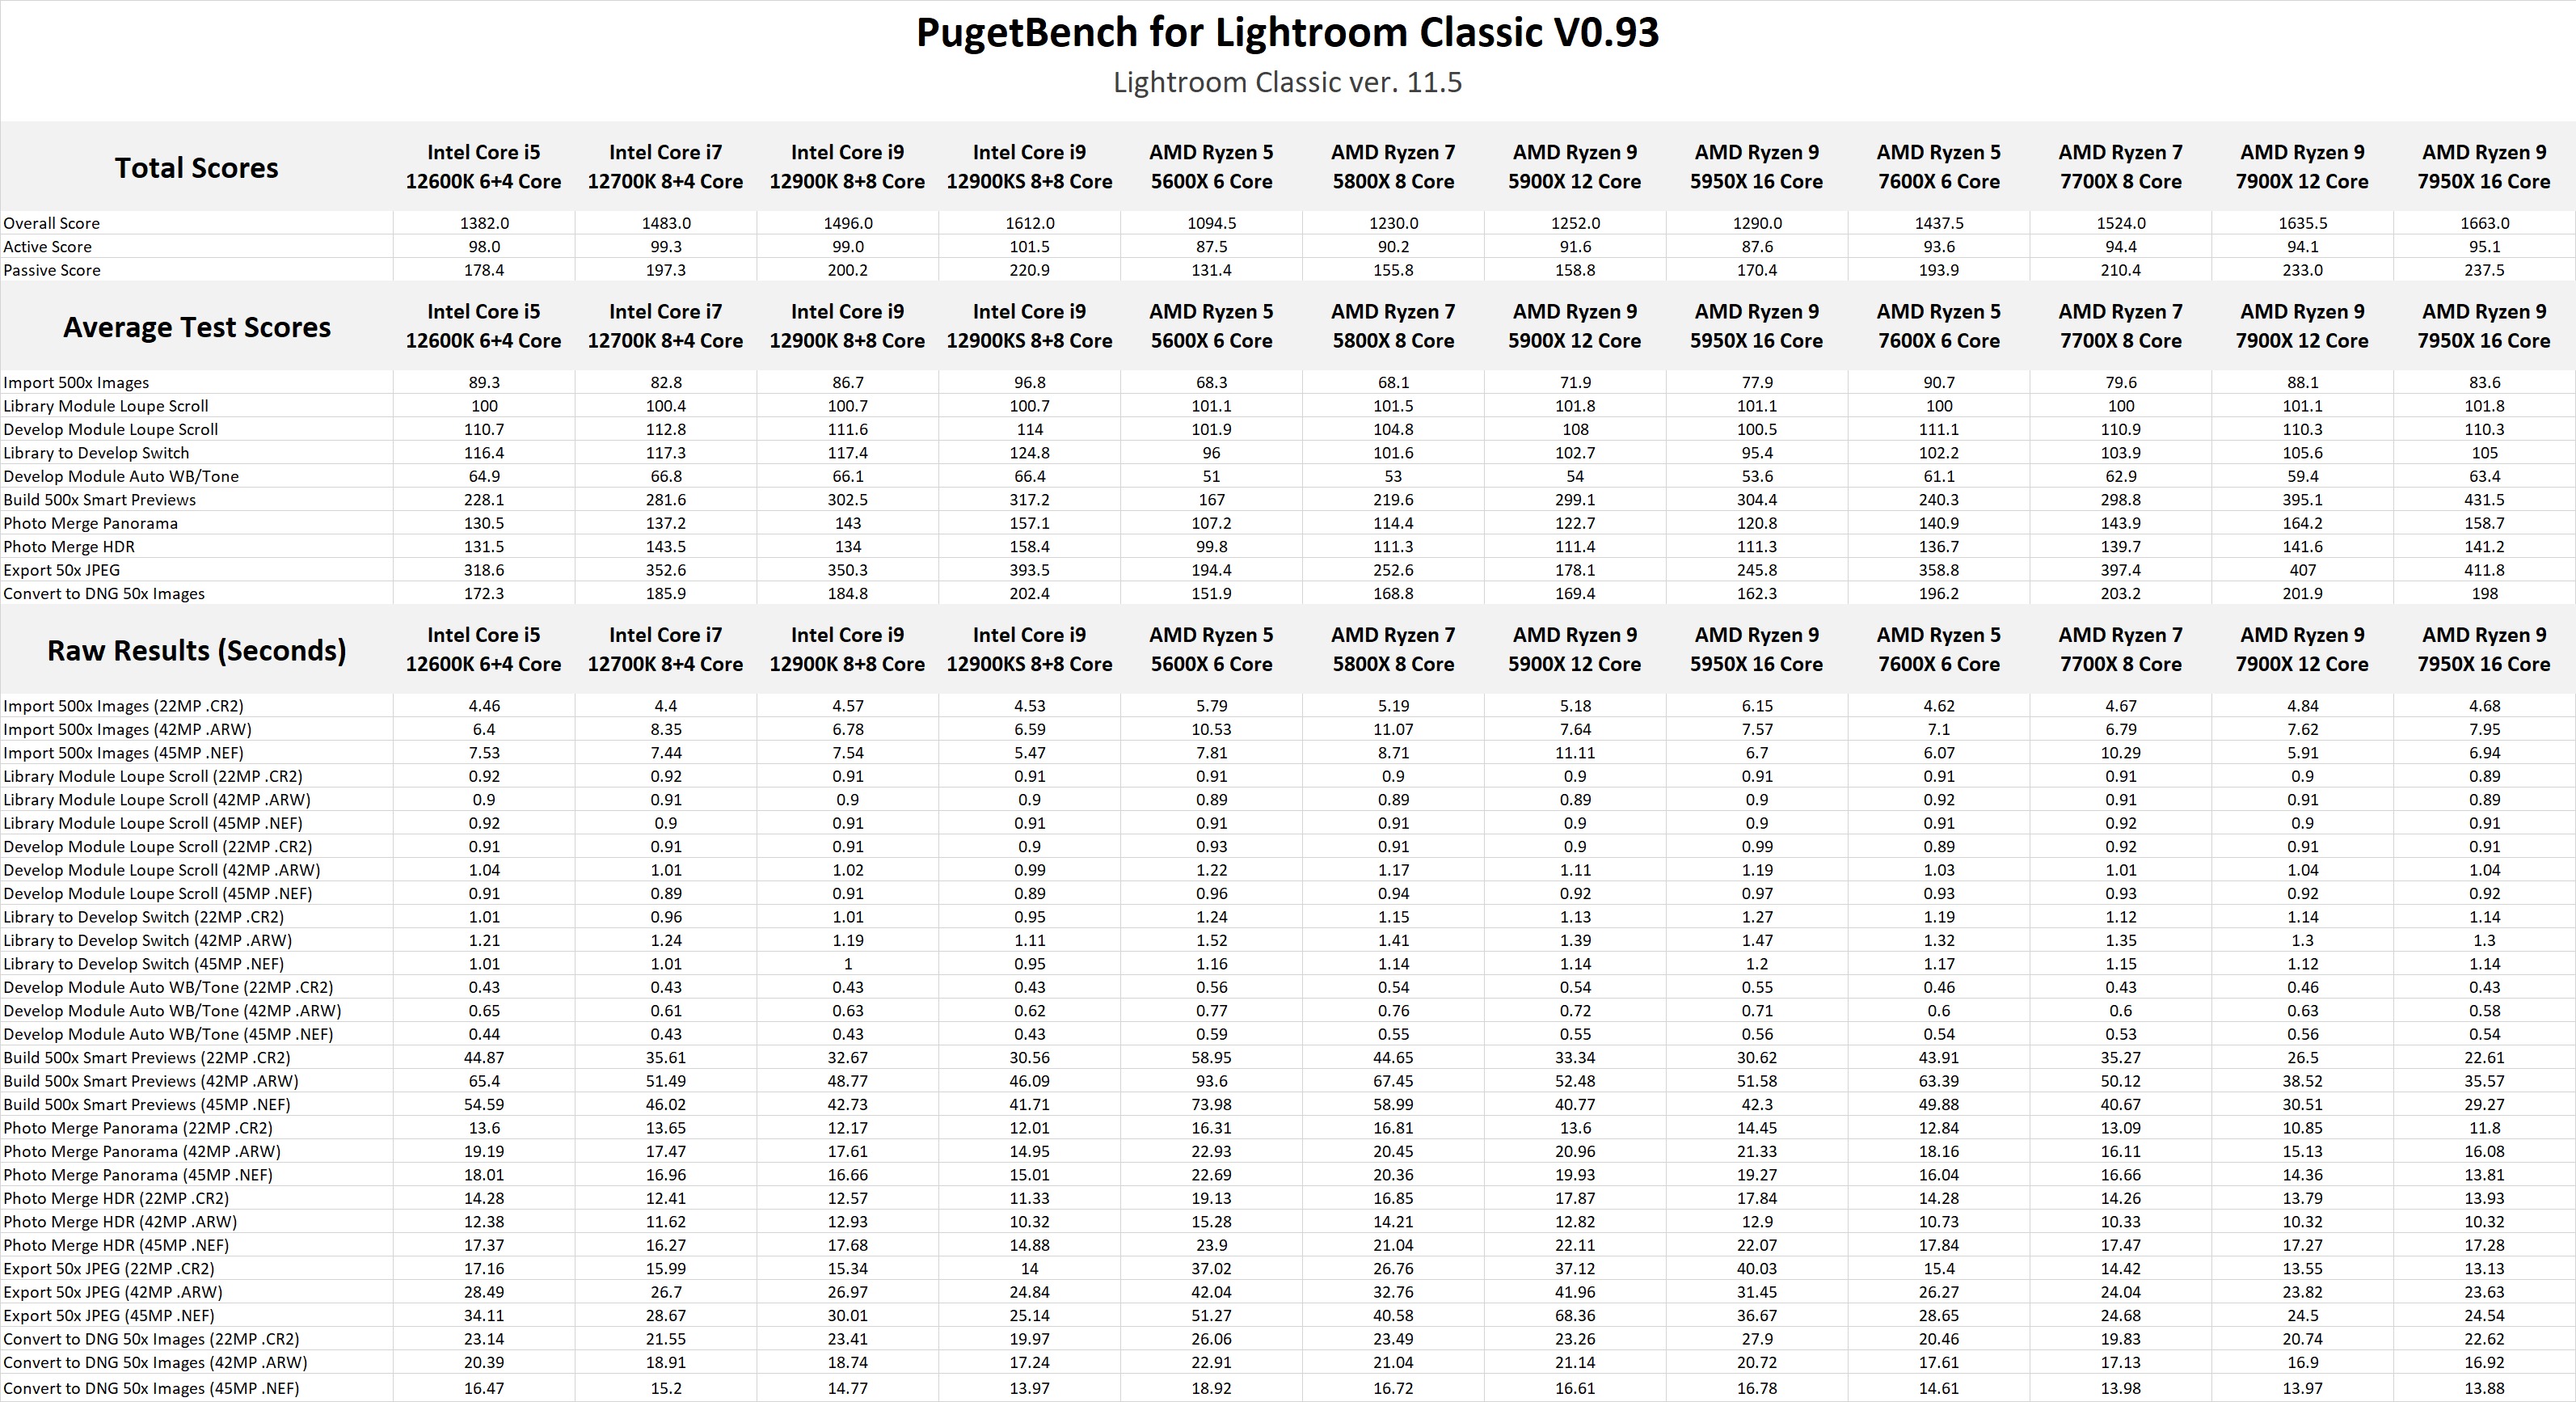 PugetBench for Lightroom Classic AMD Ryzen 7000 raw results